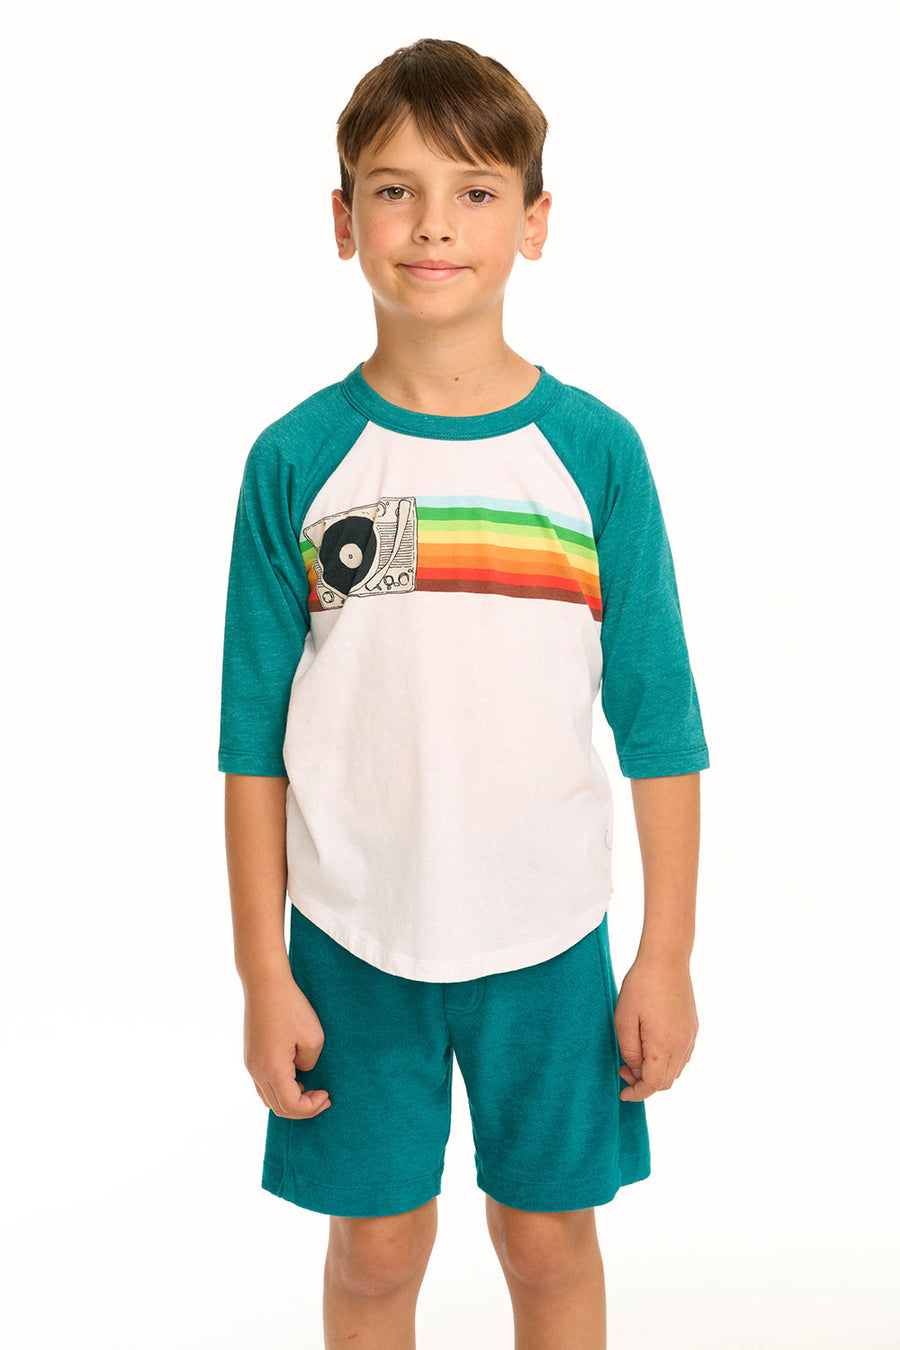 Turntable Rainbow Recycled Vintage Jersey Baseball Tee BOYS chaserbrand